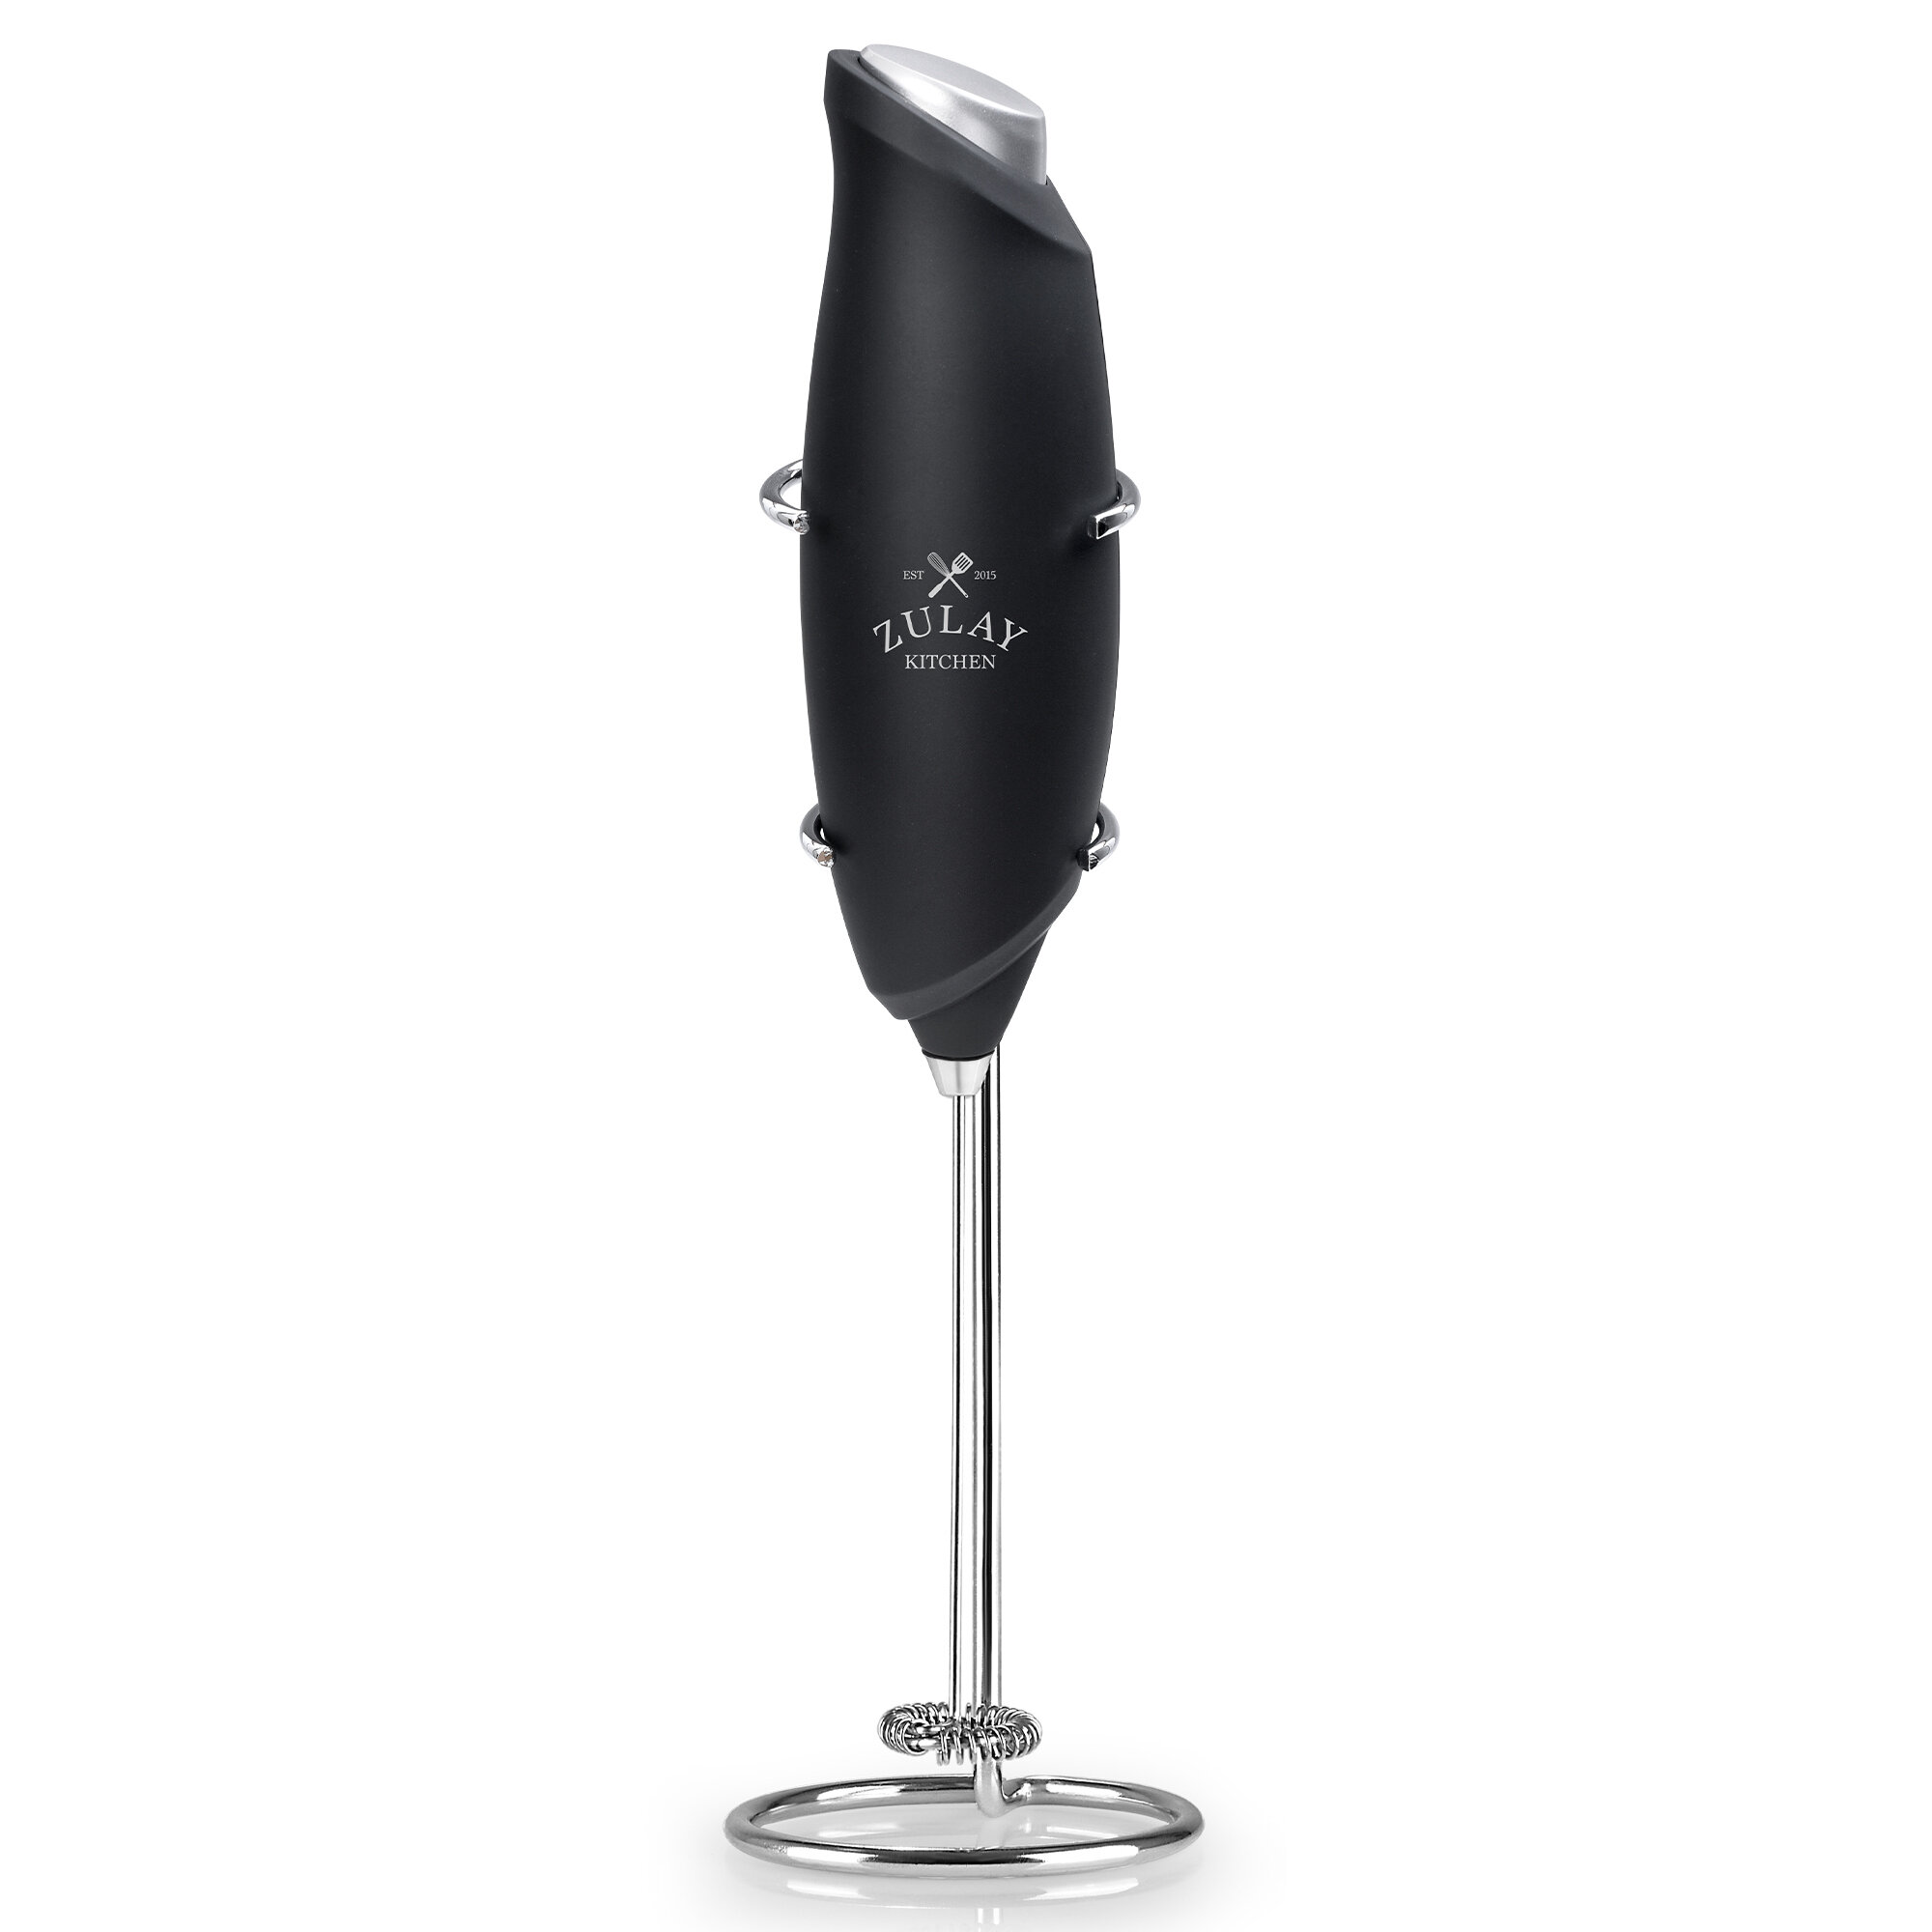 Zulay Kitchen MILK BOSS Milk Frother With Stand - Black, 1 - Harris Teeter